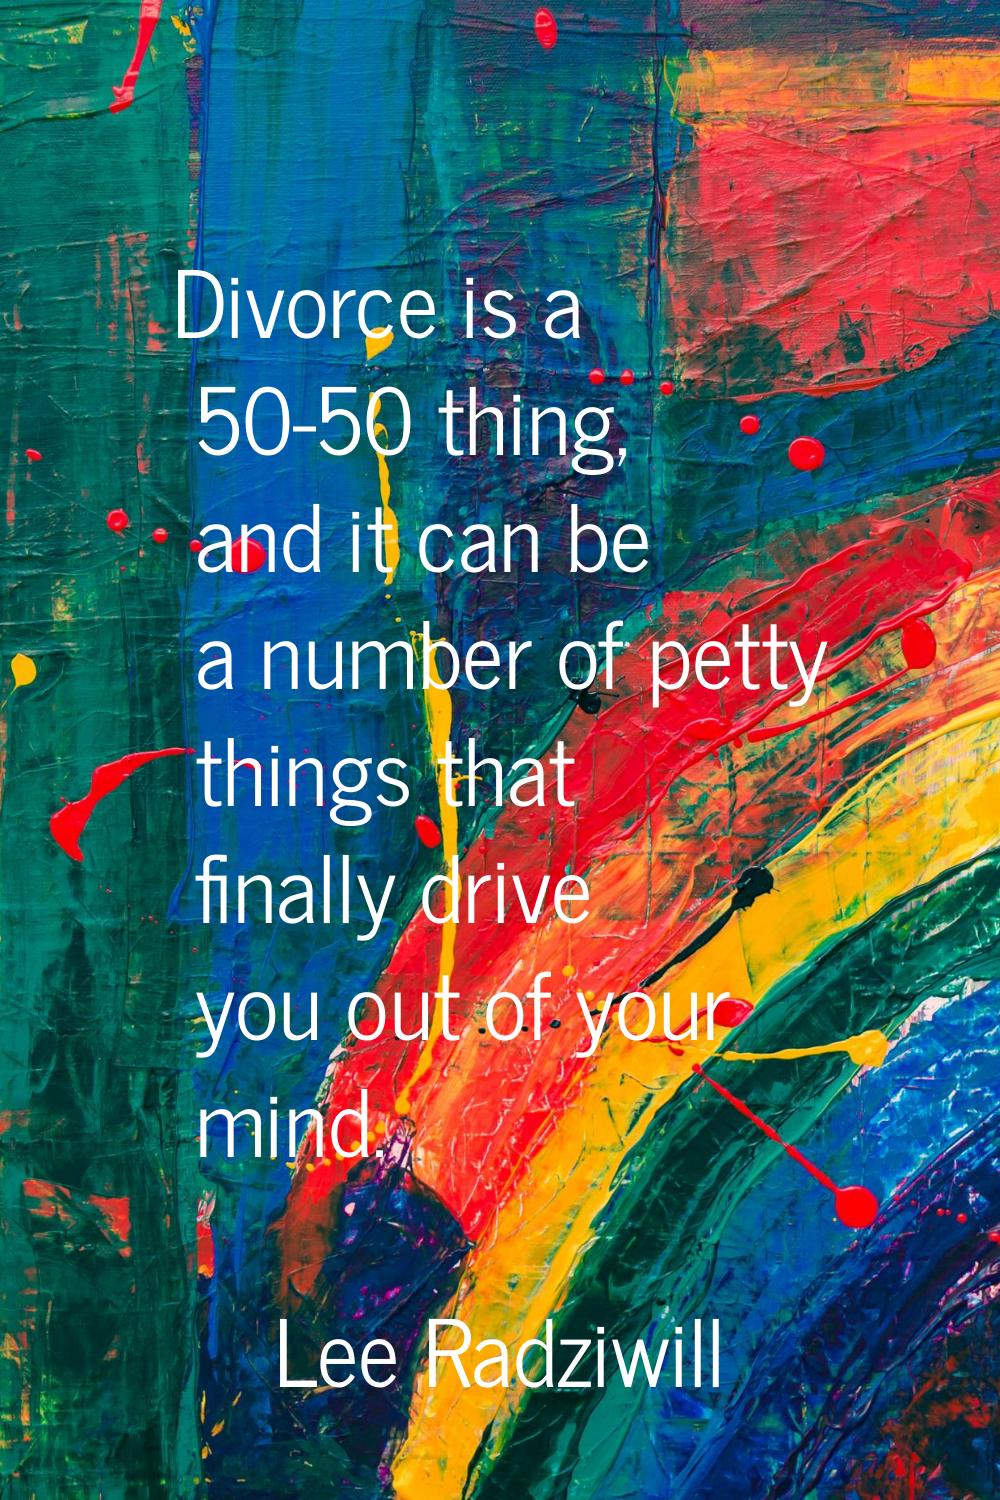 Divorce is a 50-50 thing, and it can be a number of petty things that finally drive you out of your